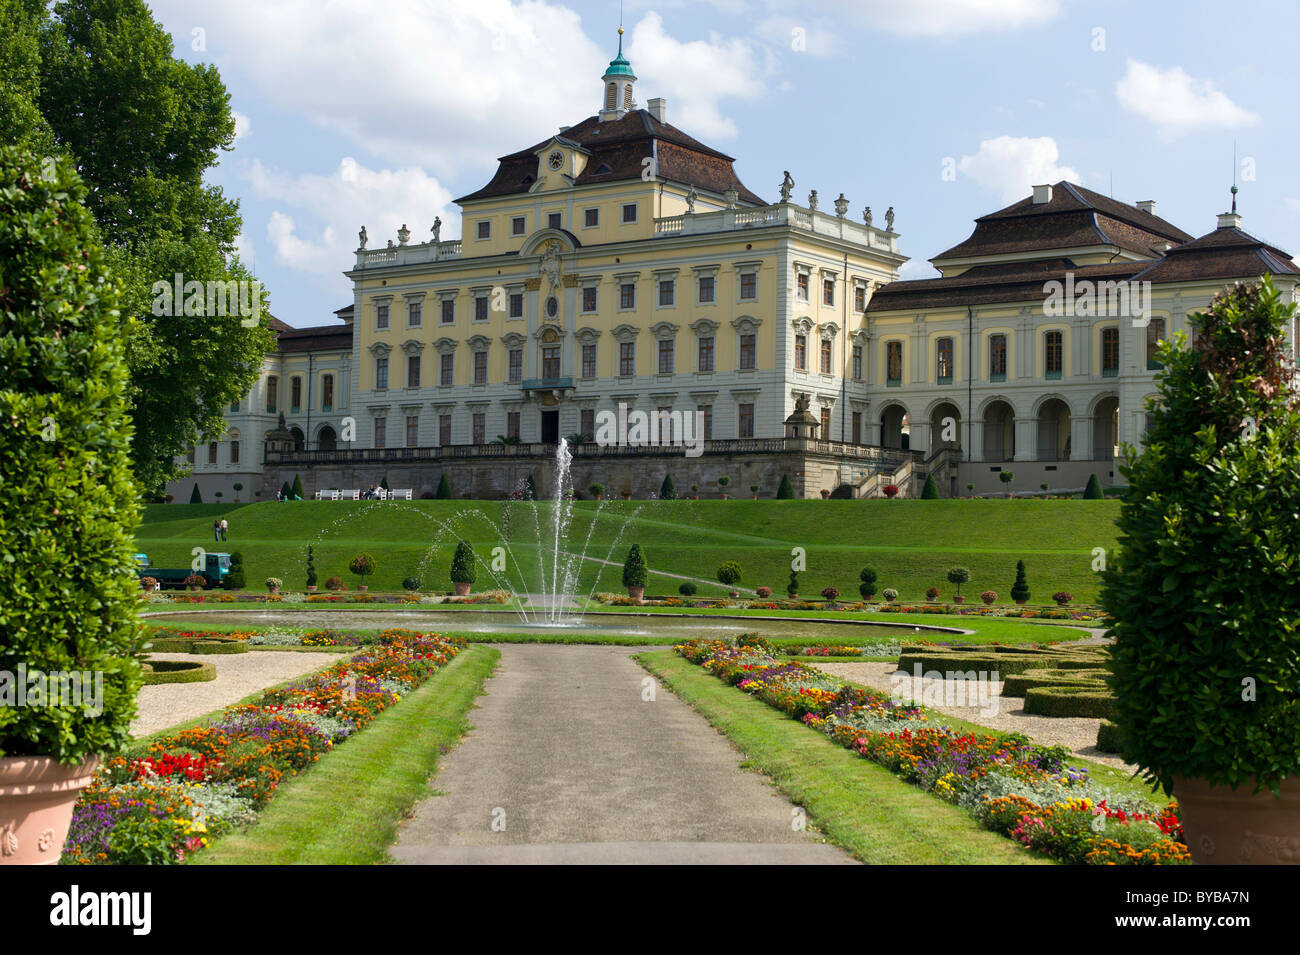 The Old Corps de Logis, Schloss Ludwigsburg Palace, north side with garden, Ludwigsburg, Baden-Wurttemberg, Germany, Europe Stock Photo